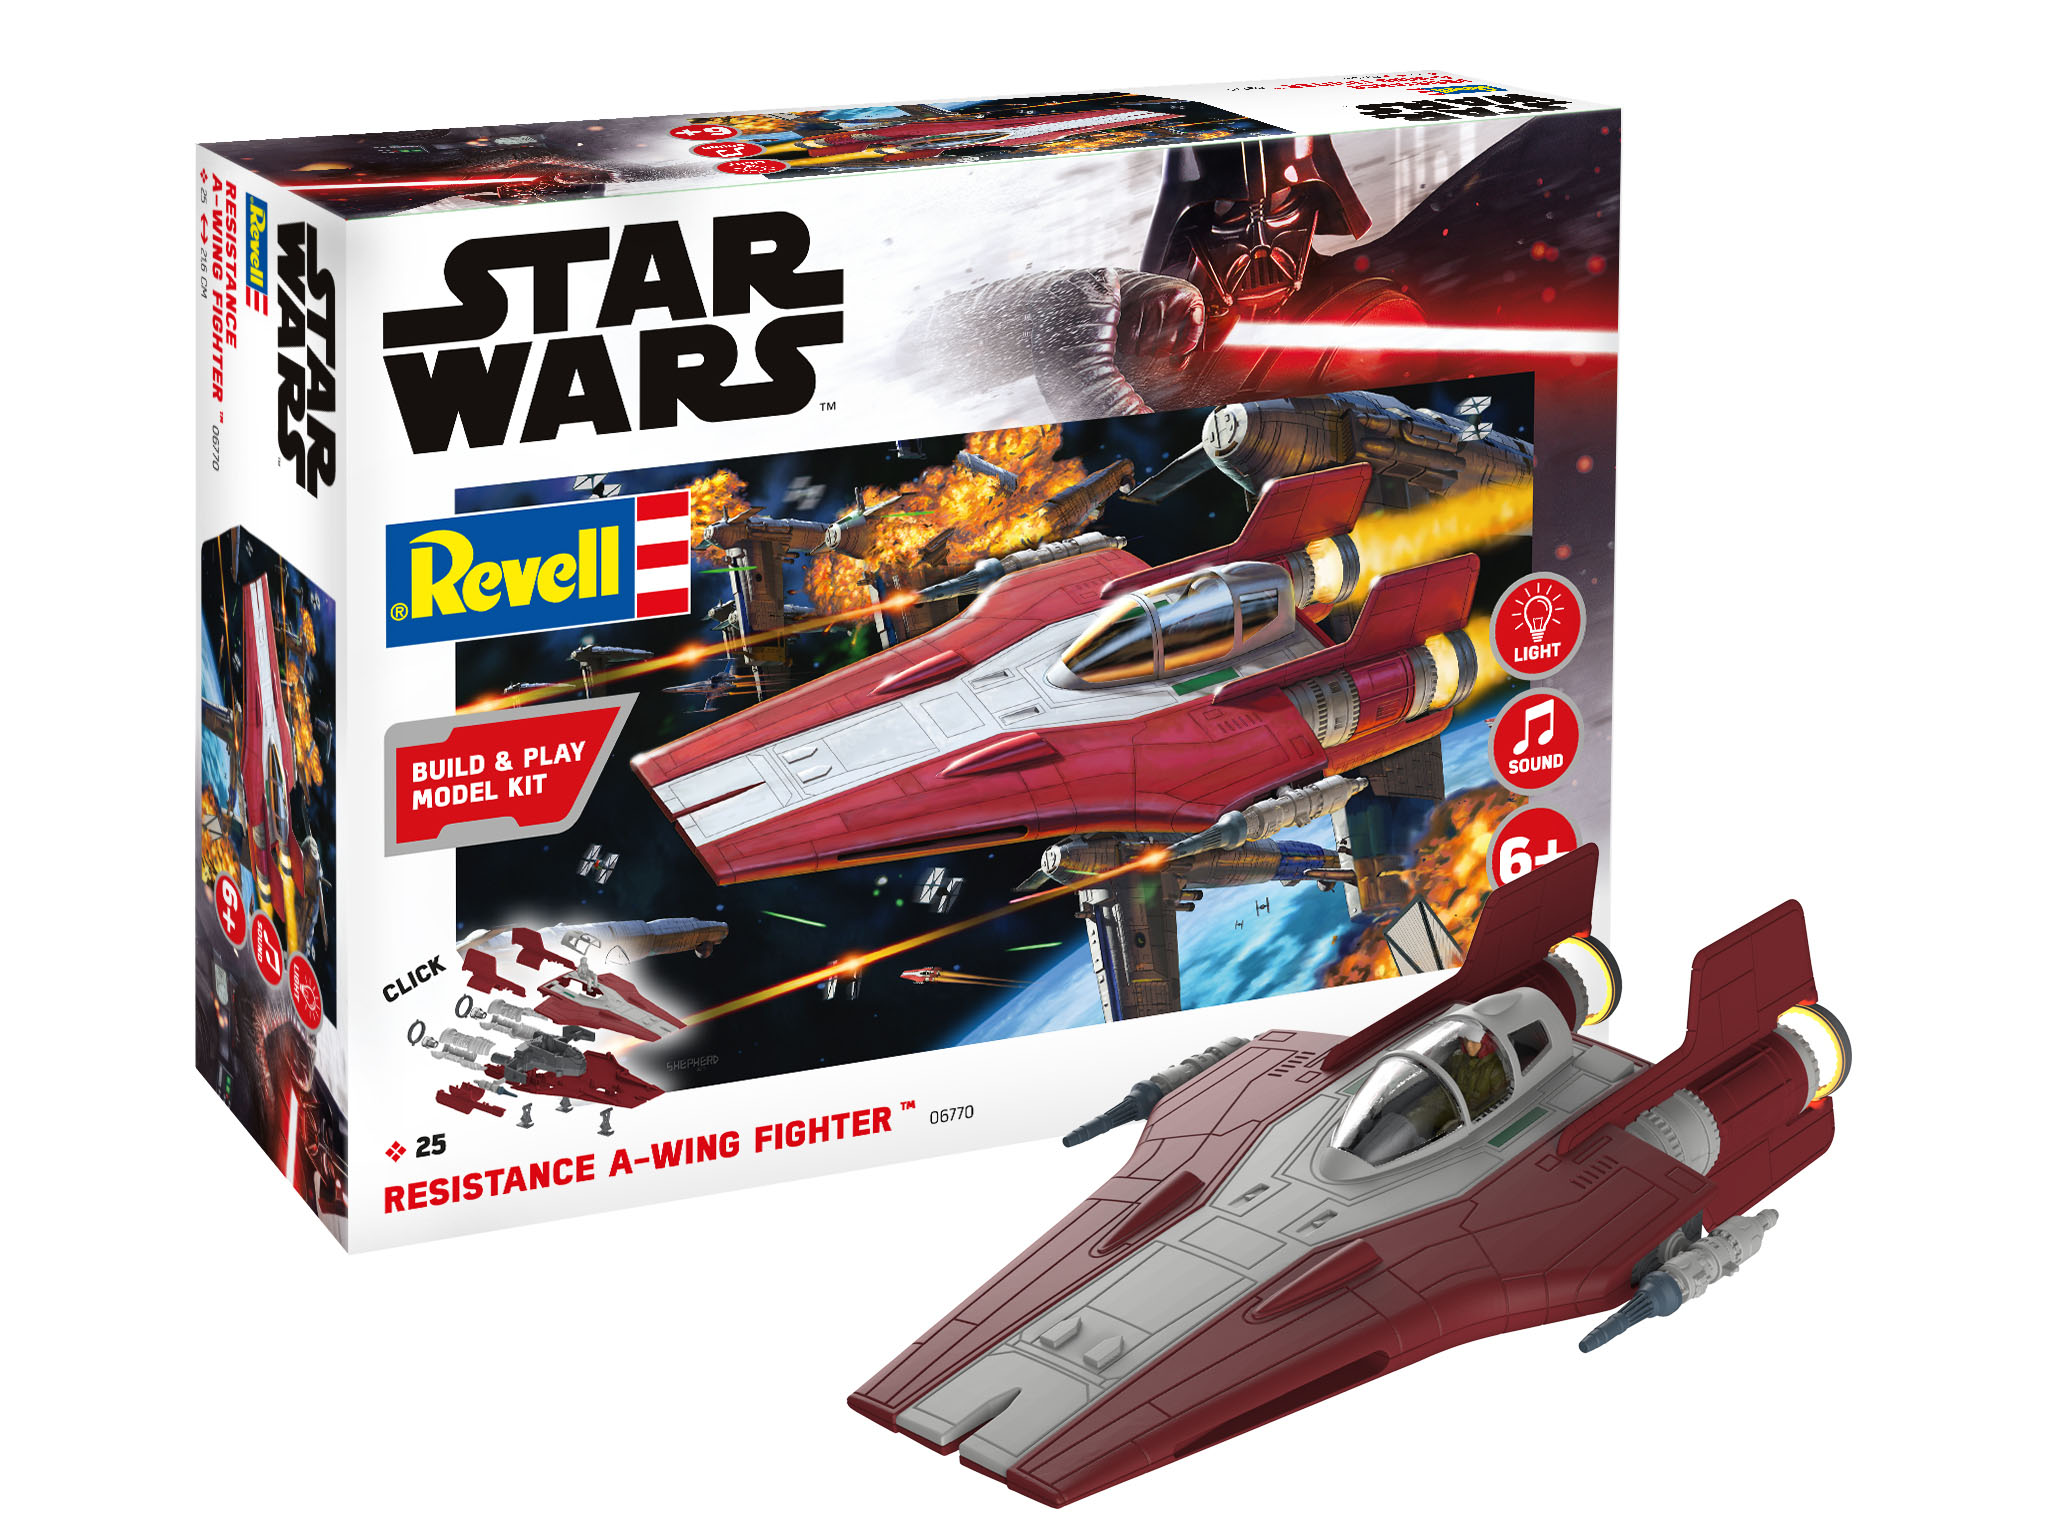 Revell Star Wars Resistance A-wing Fighter 1:44 bouwpakket easy click systeem